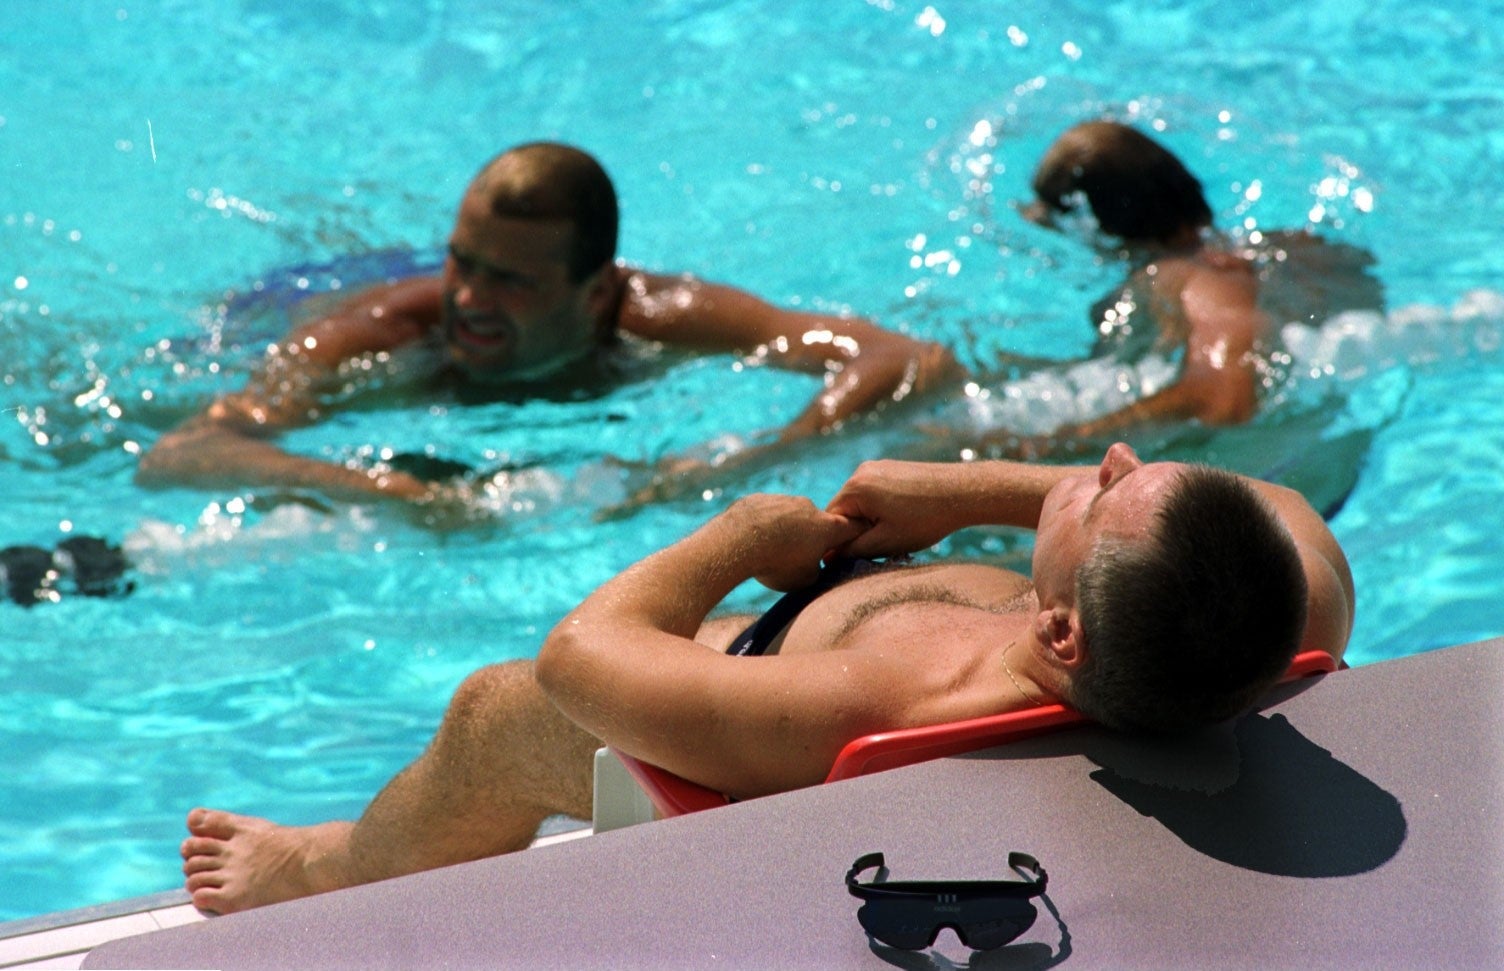 Water polo player takes a rest during training at the Georgia Aquatic Centre, 1996